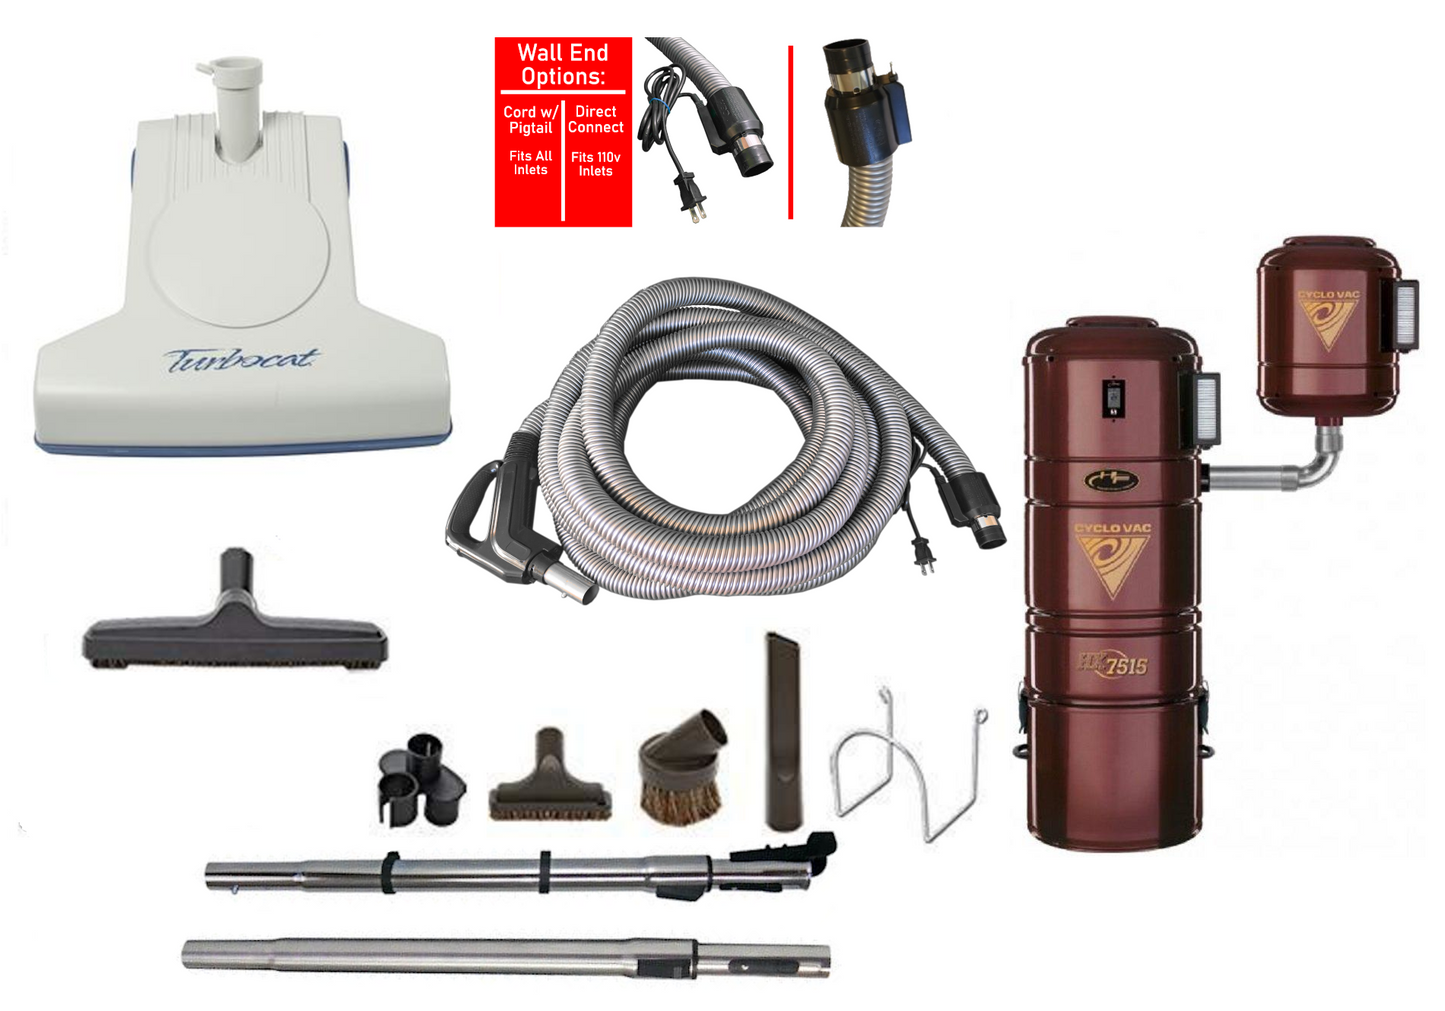 Cyclovac H7525 Complete Central Vacuum Package with Turbocat Head